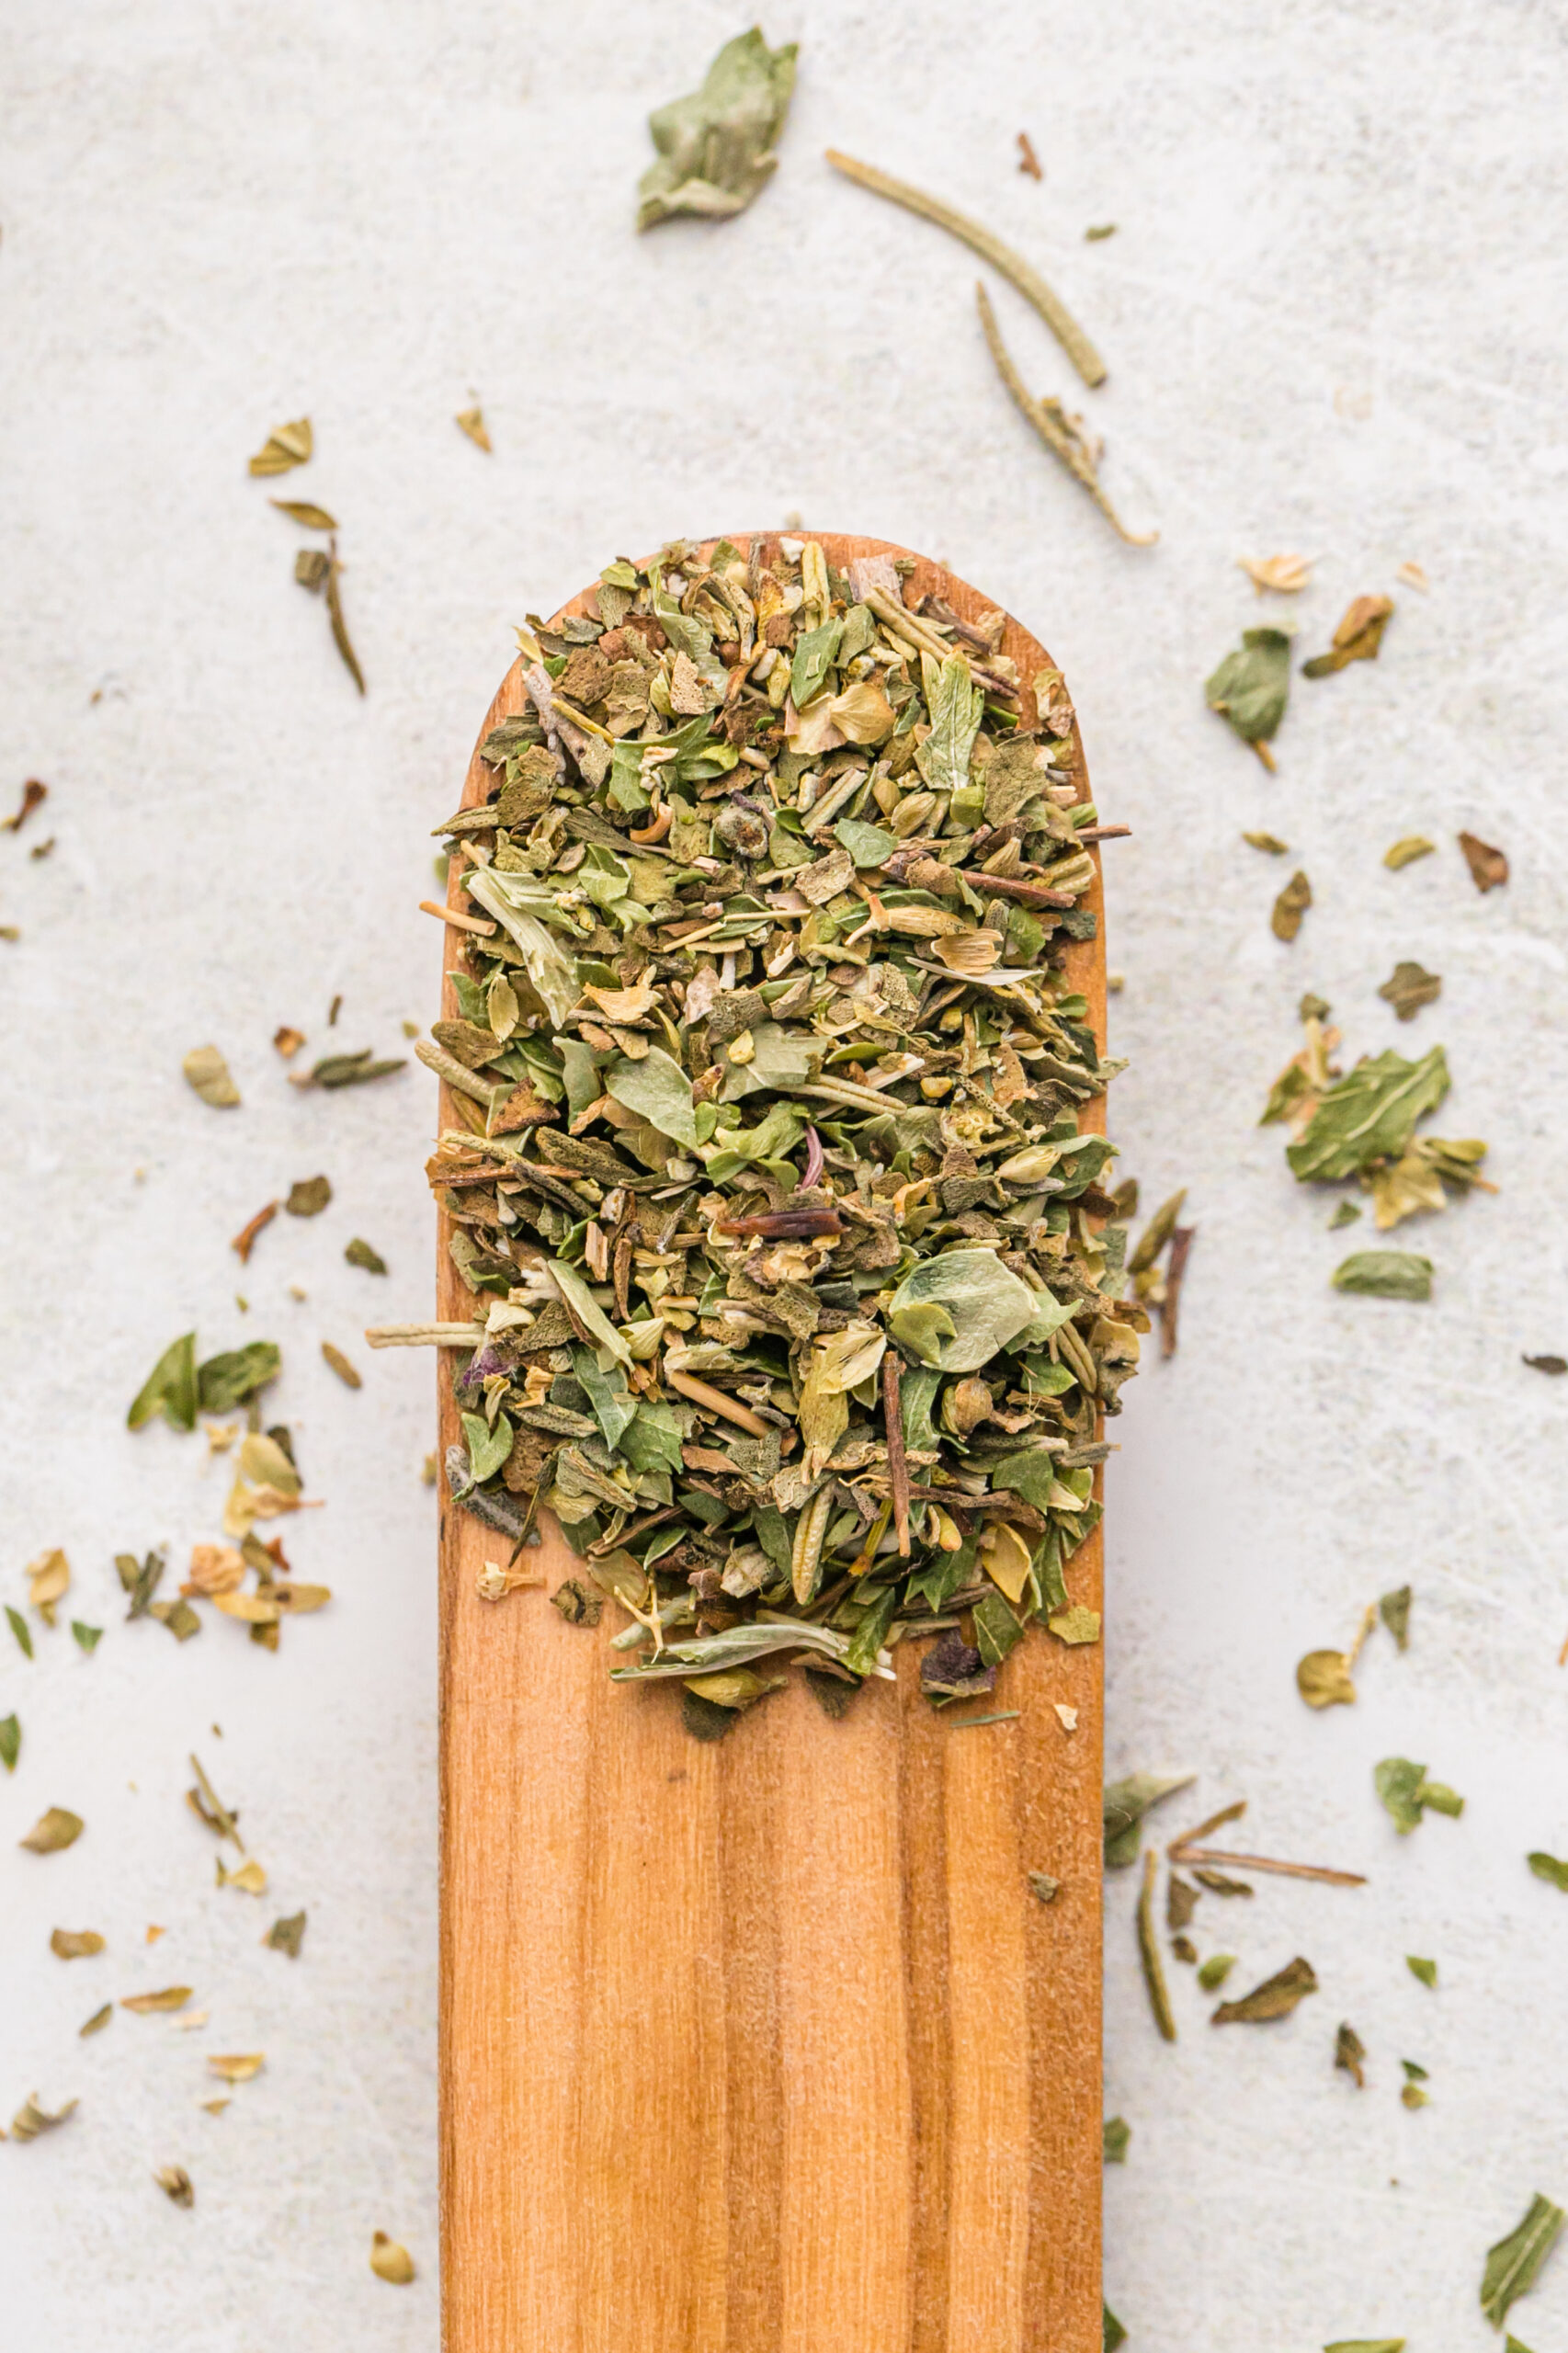 A wooden spoon filled with a homemade spice blend